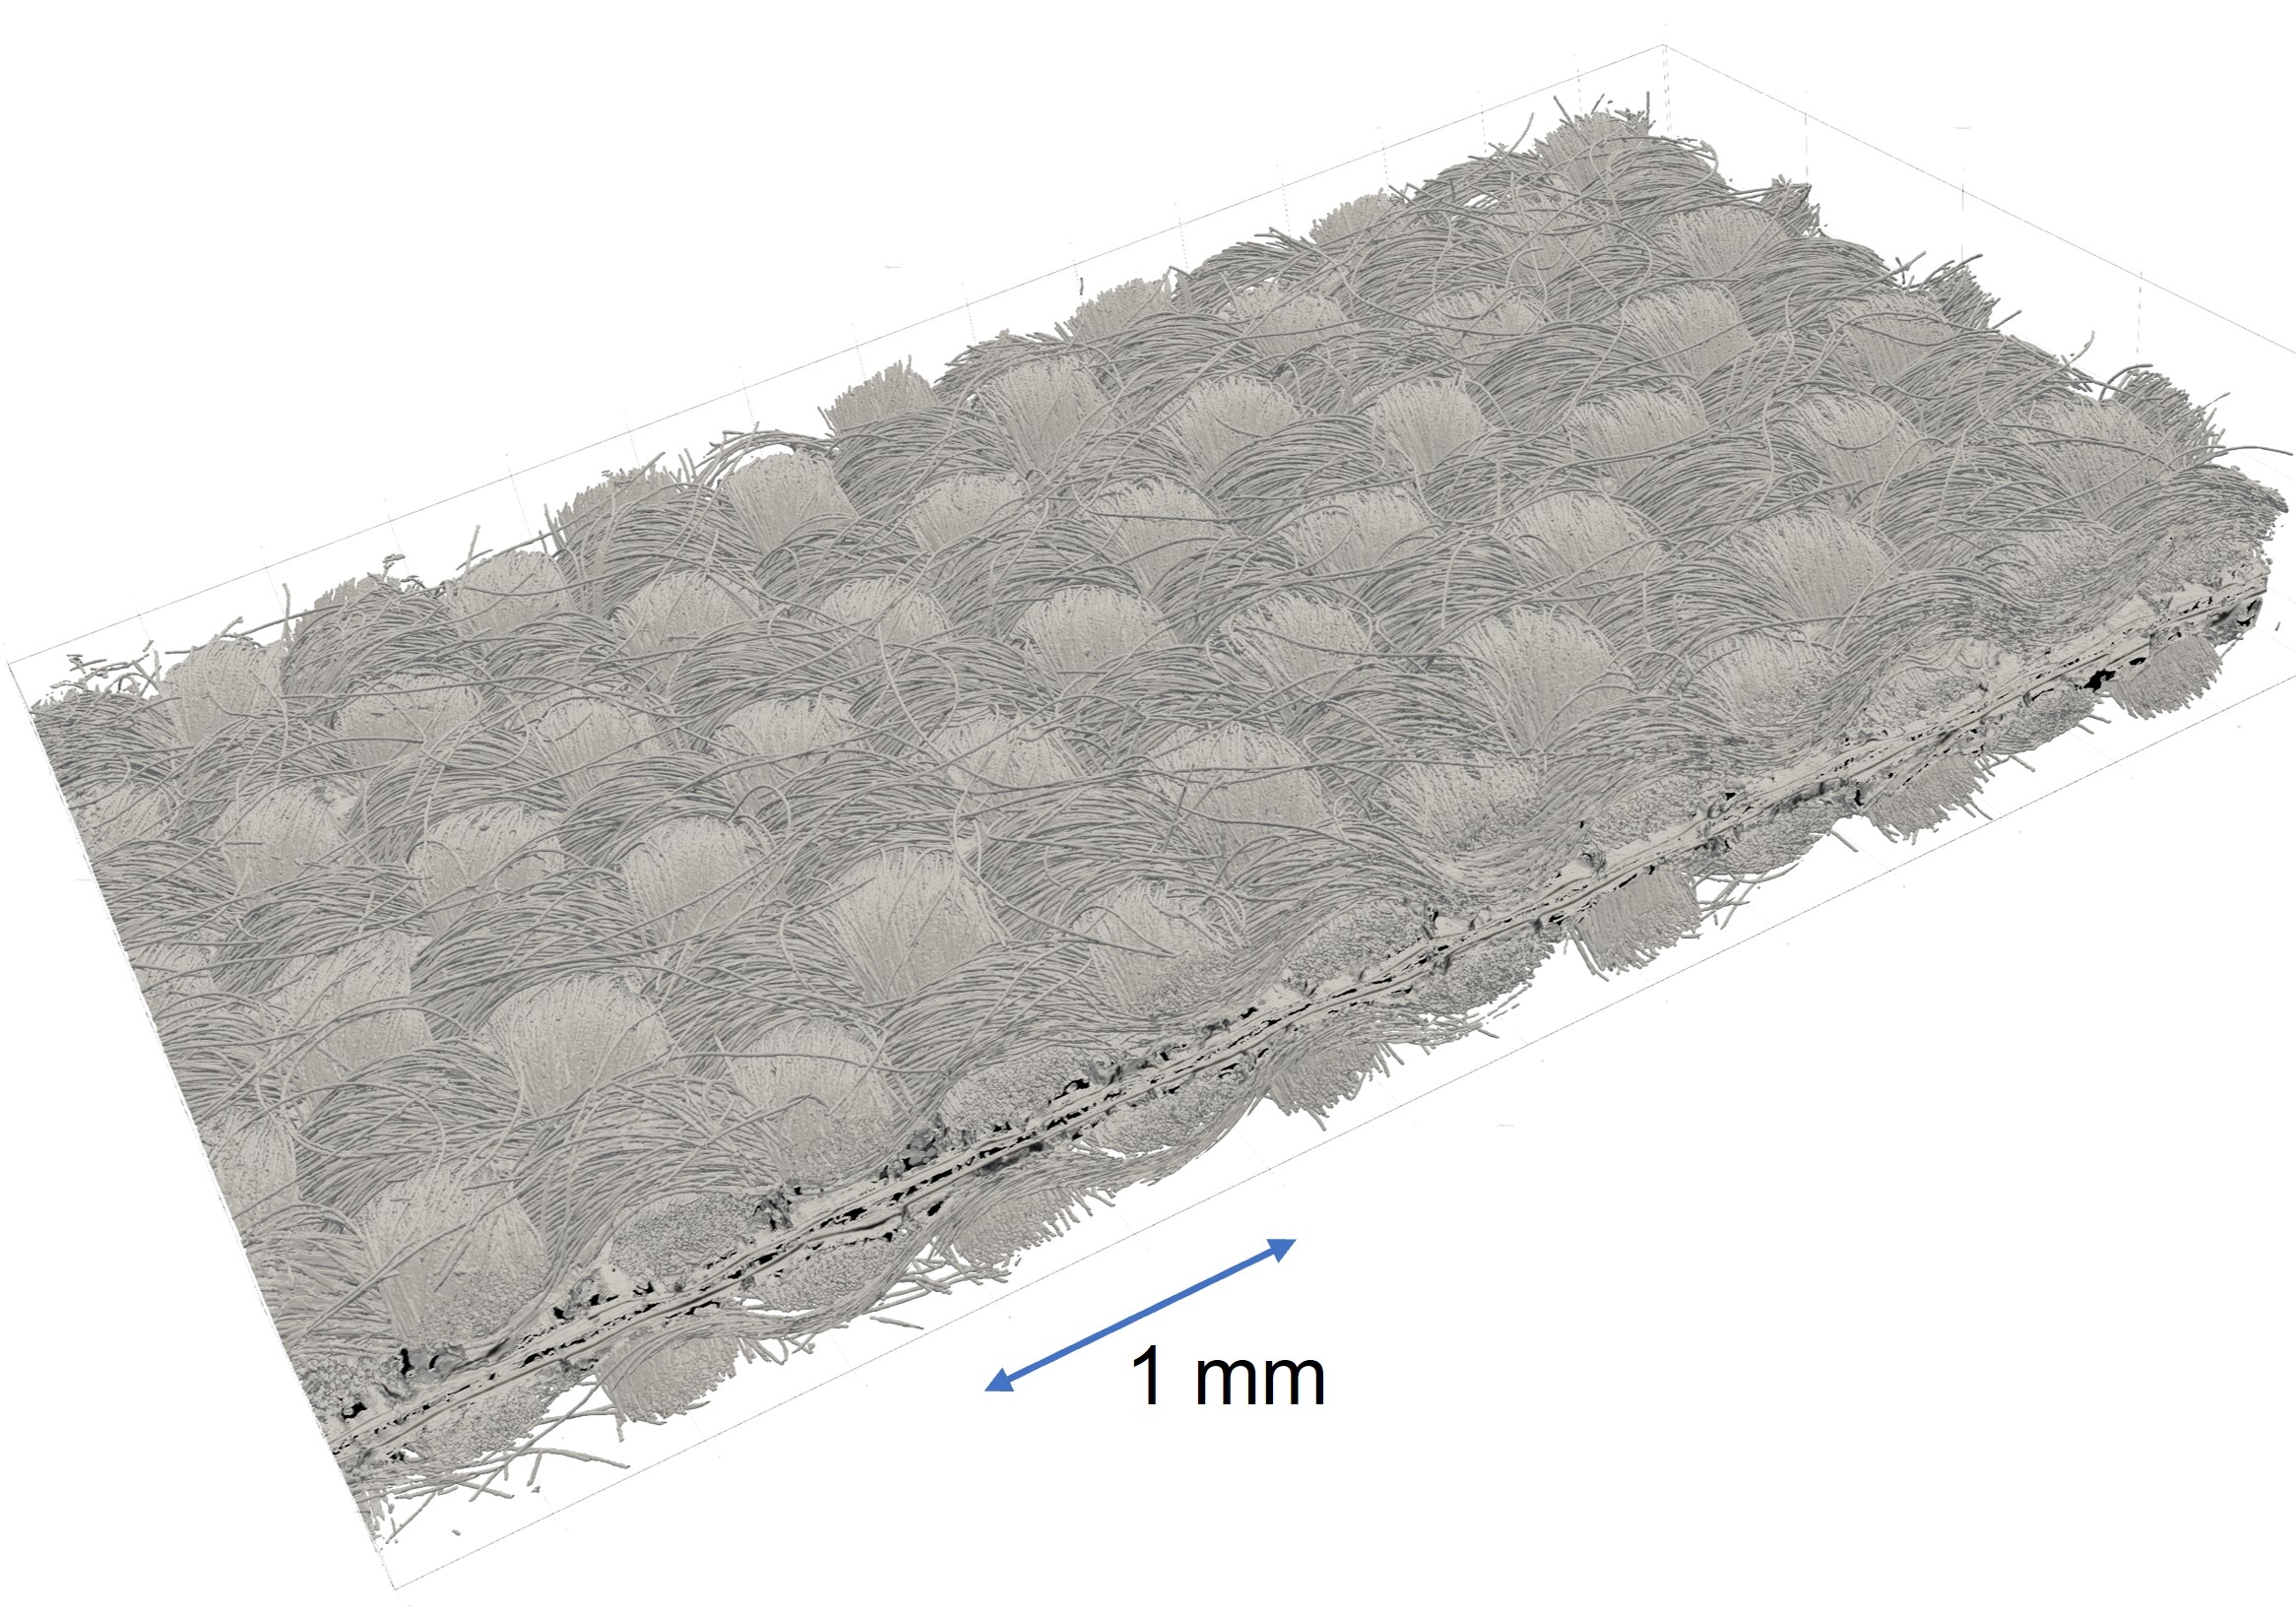 3D X-ray scan of a hydrogen fuel cell, showing carbon paper weaves, membrane and catalysts (in black). Scan provided by Dr Quentin Meyer